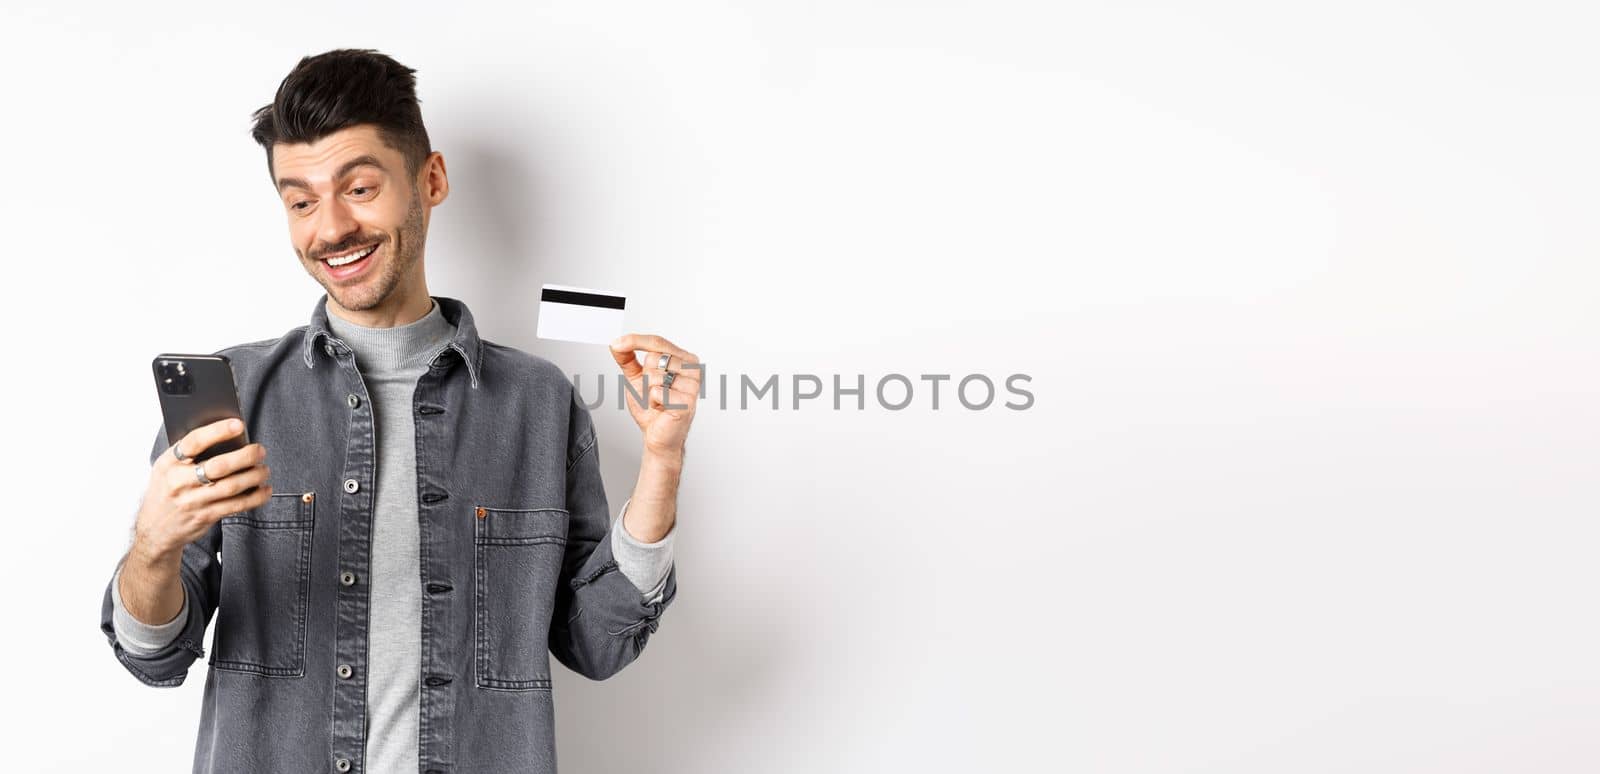 Online shopping concept. Handsome man buying in internet, showing plastic credit card and look at smartphone, standing against white background.